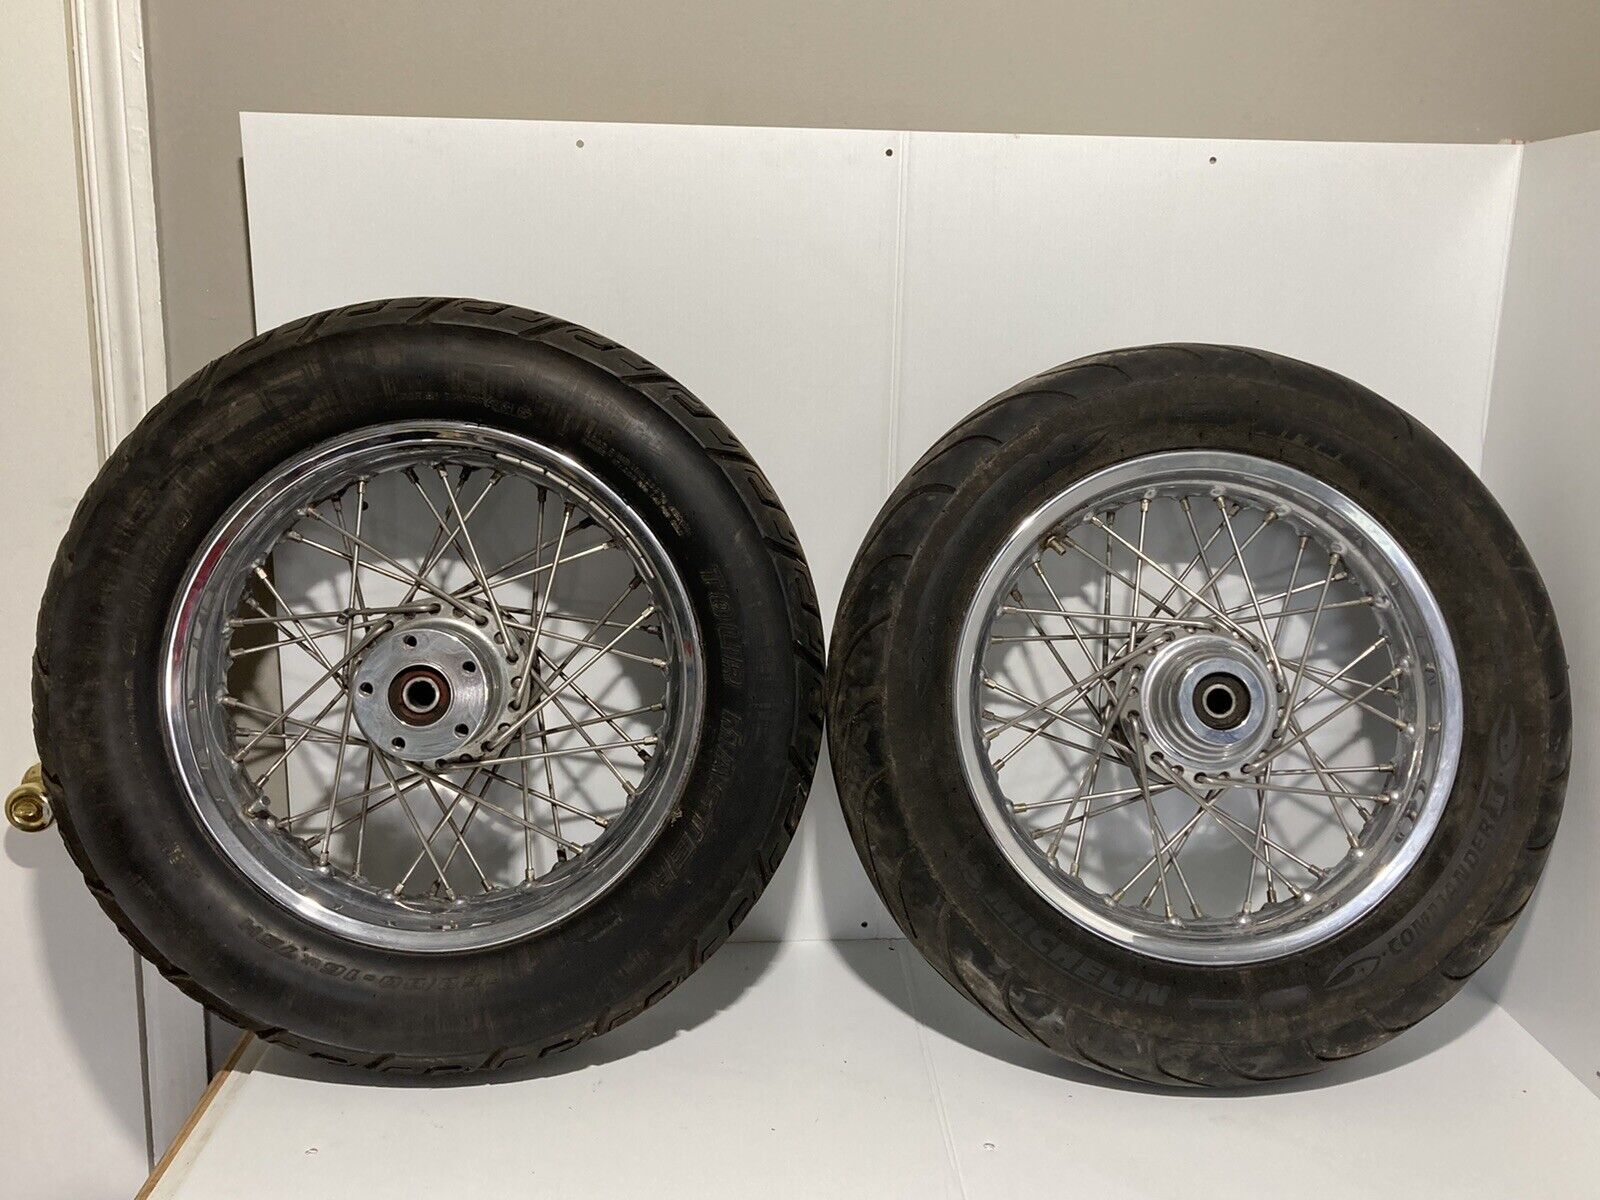 1999 Victory V92C Wheel Set (Front Tire Ok, Rear Tire Not)(Some Pitting) (OEM)